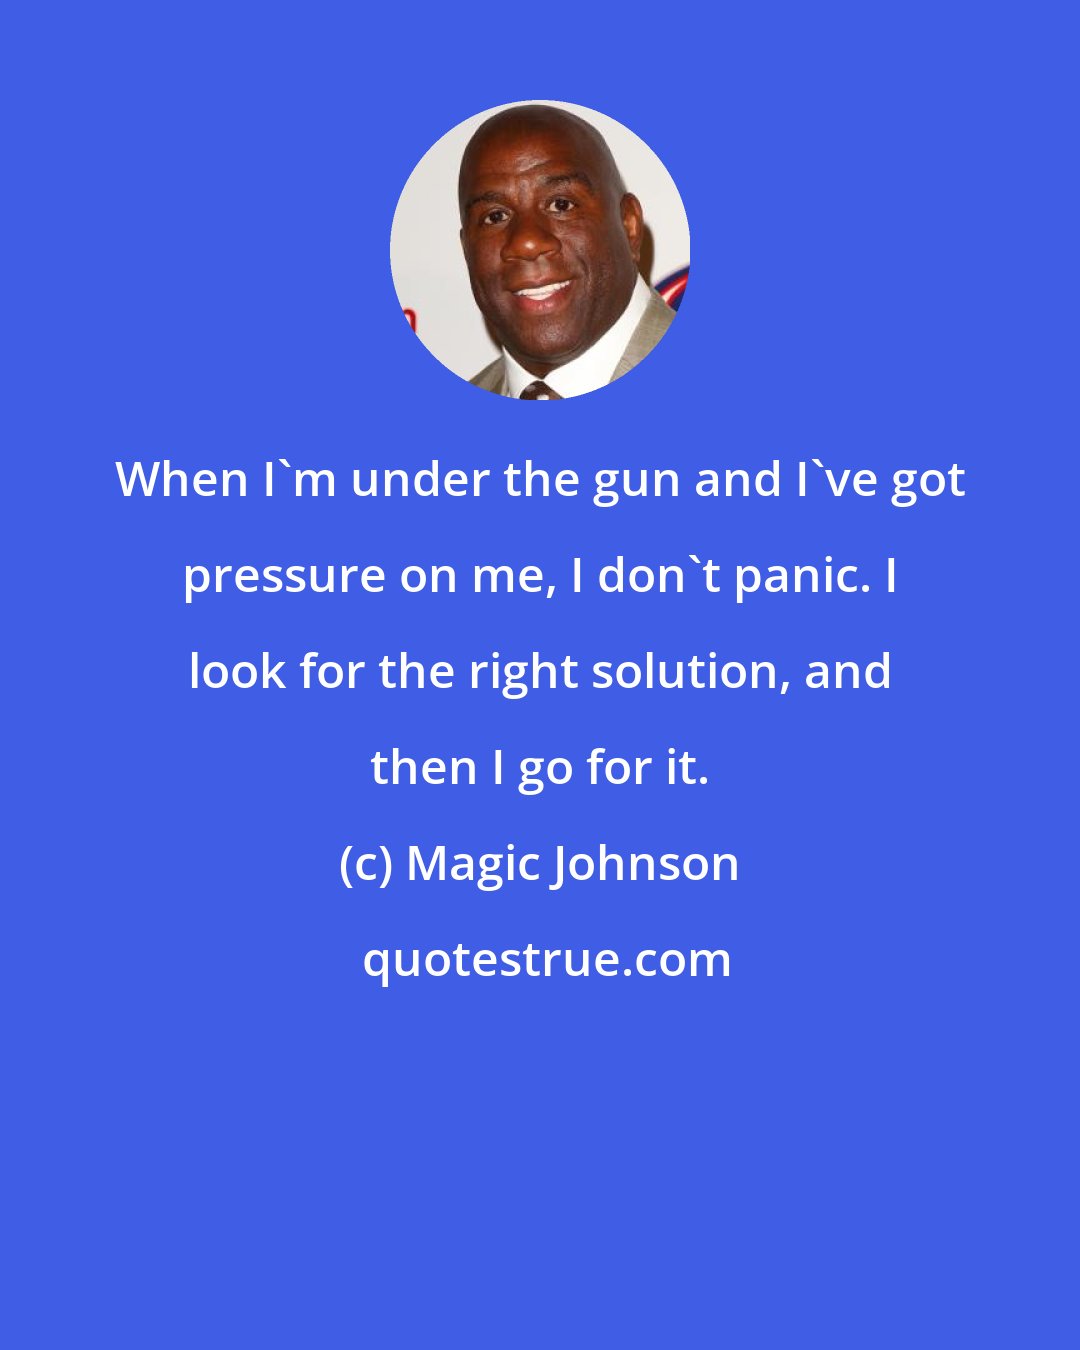 Magic Johnson: When I'm under the gun and I've got pressure on me, I don't panic. I look for the right solution, and then I go for it.